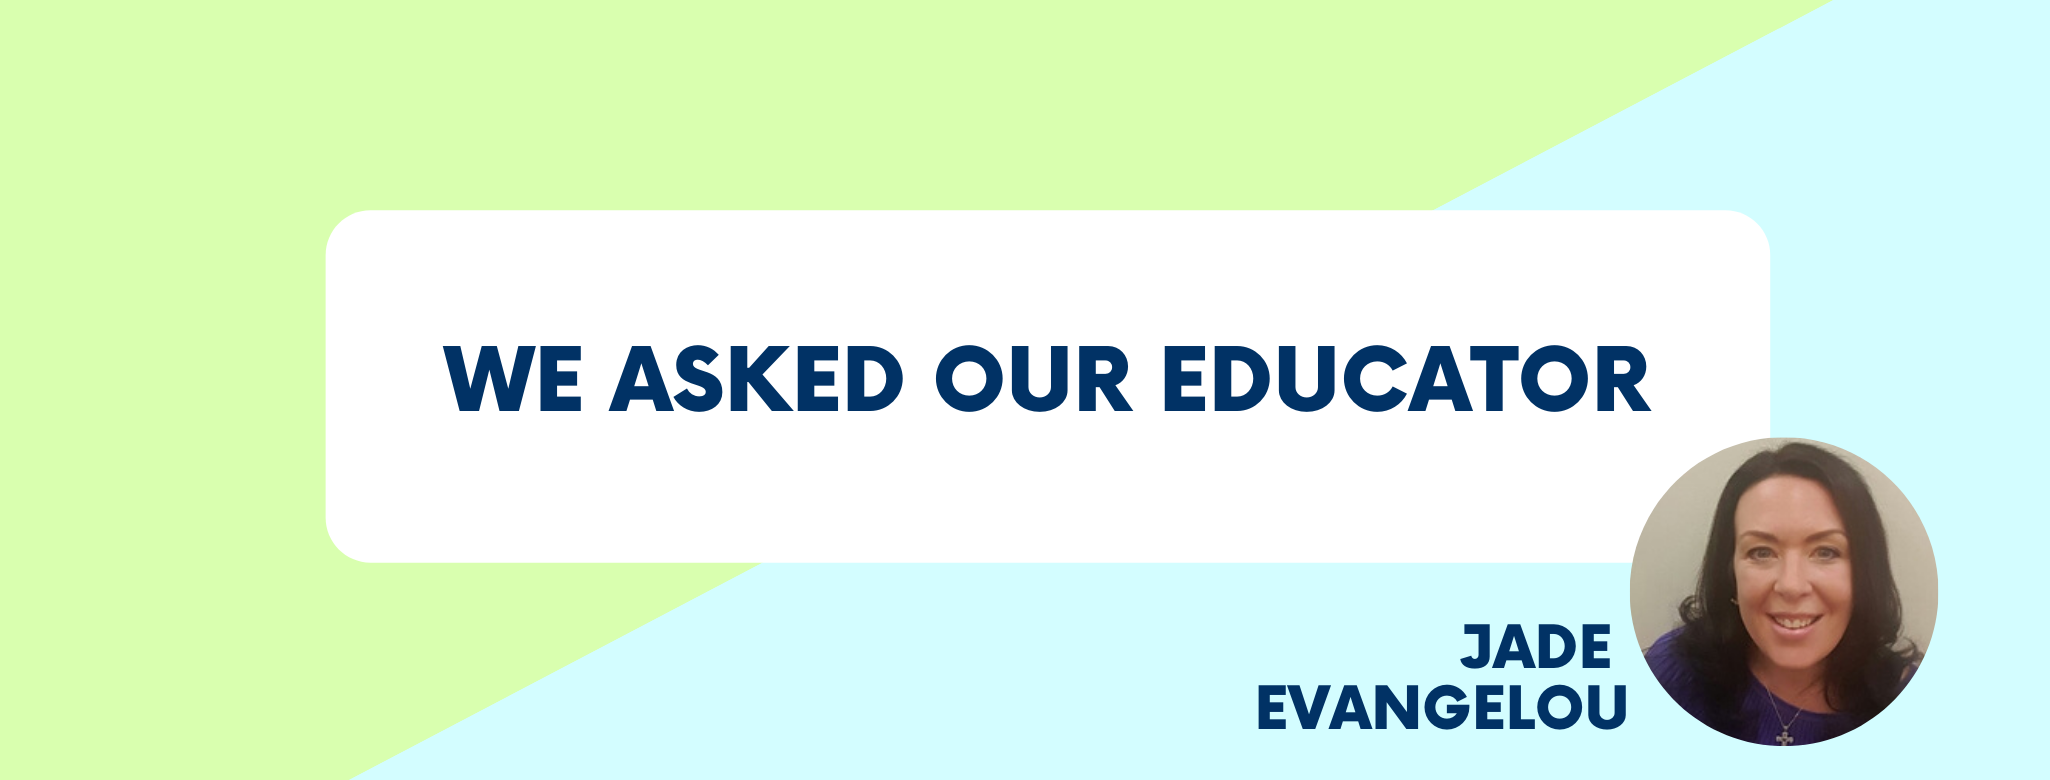 We Asked Our Educator...